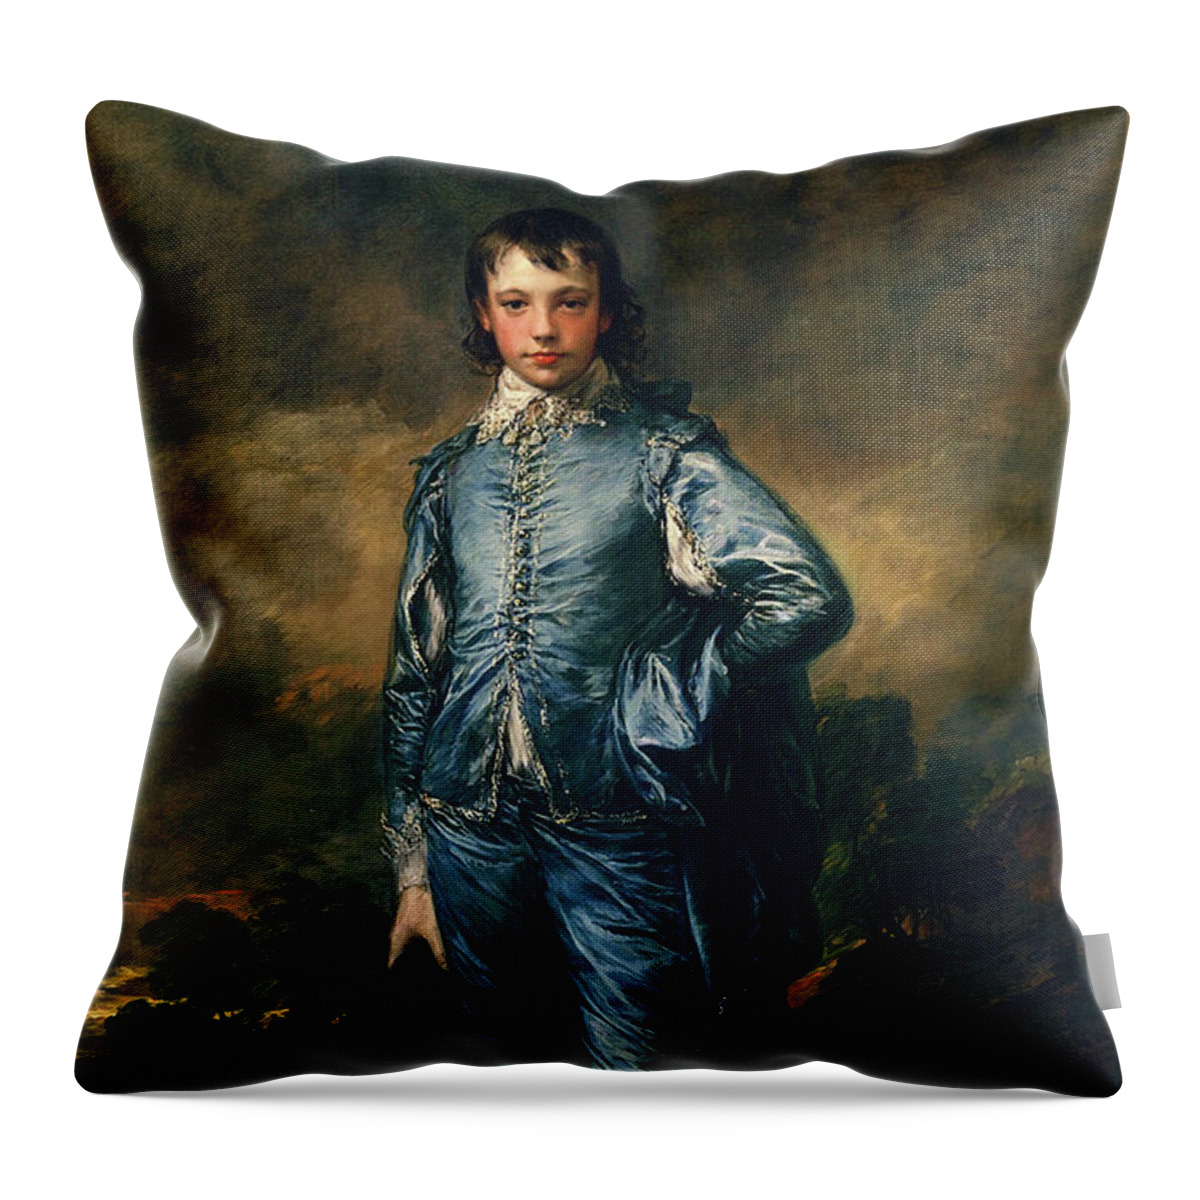 The Blue Boy Throw Pillow featuring the painting The Blue Boy by Thomas Gainsborough by Rolando Burbon